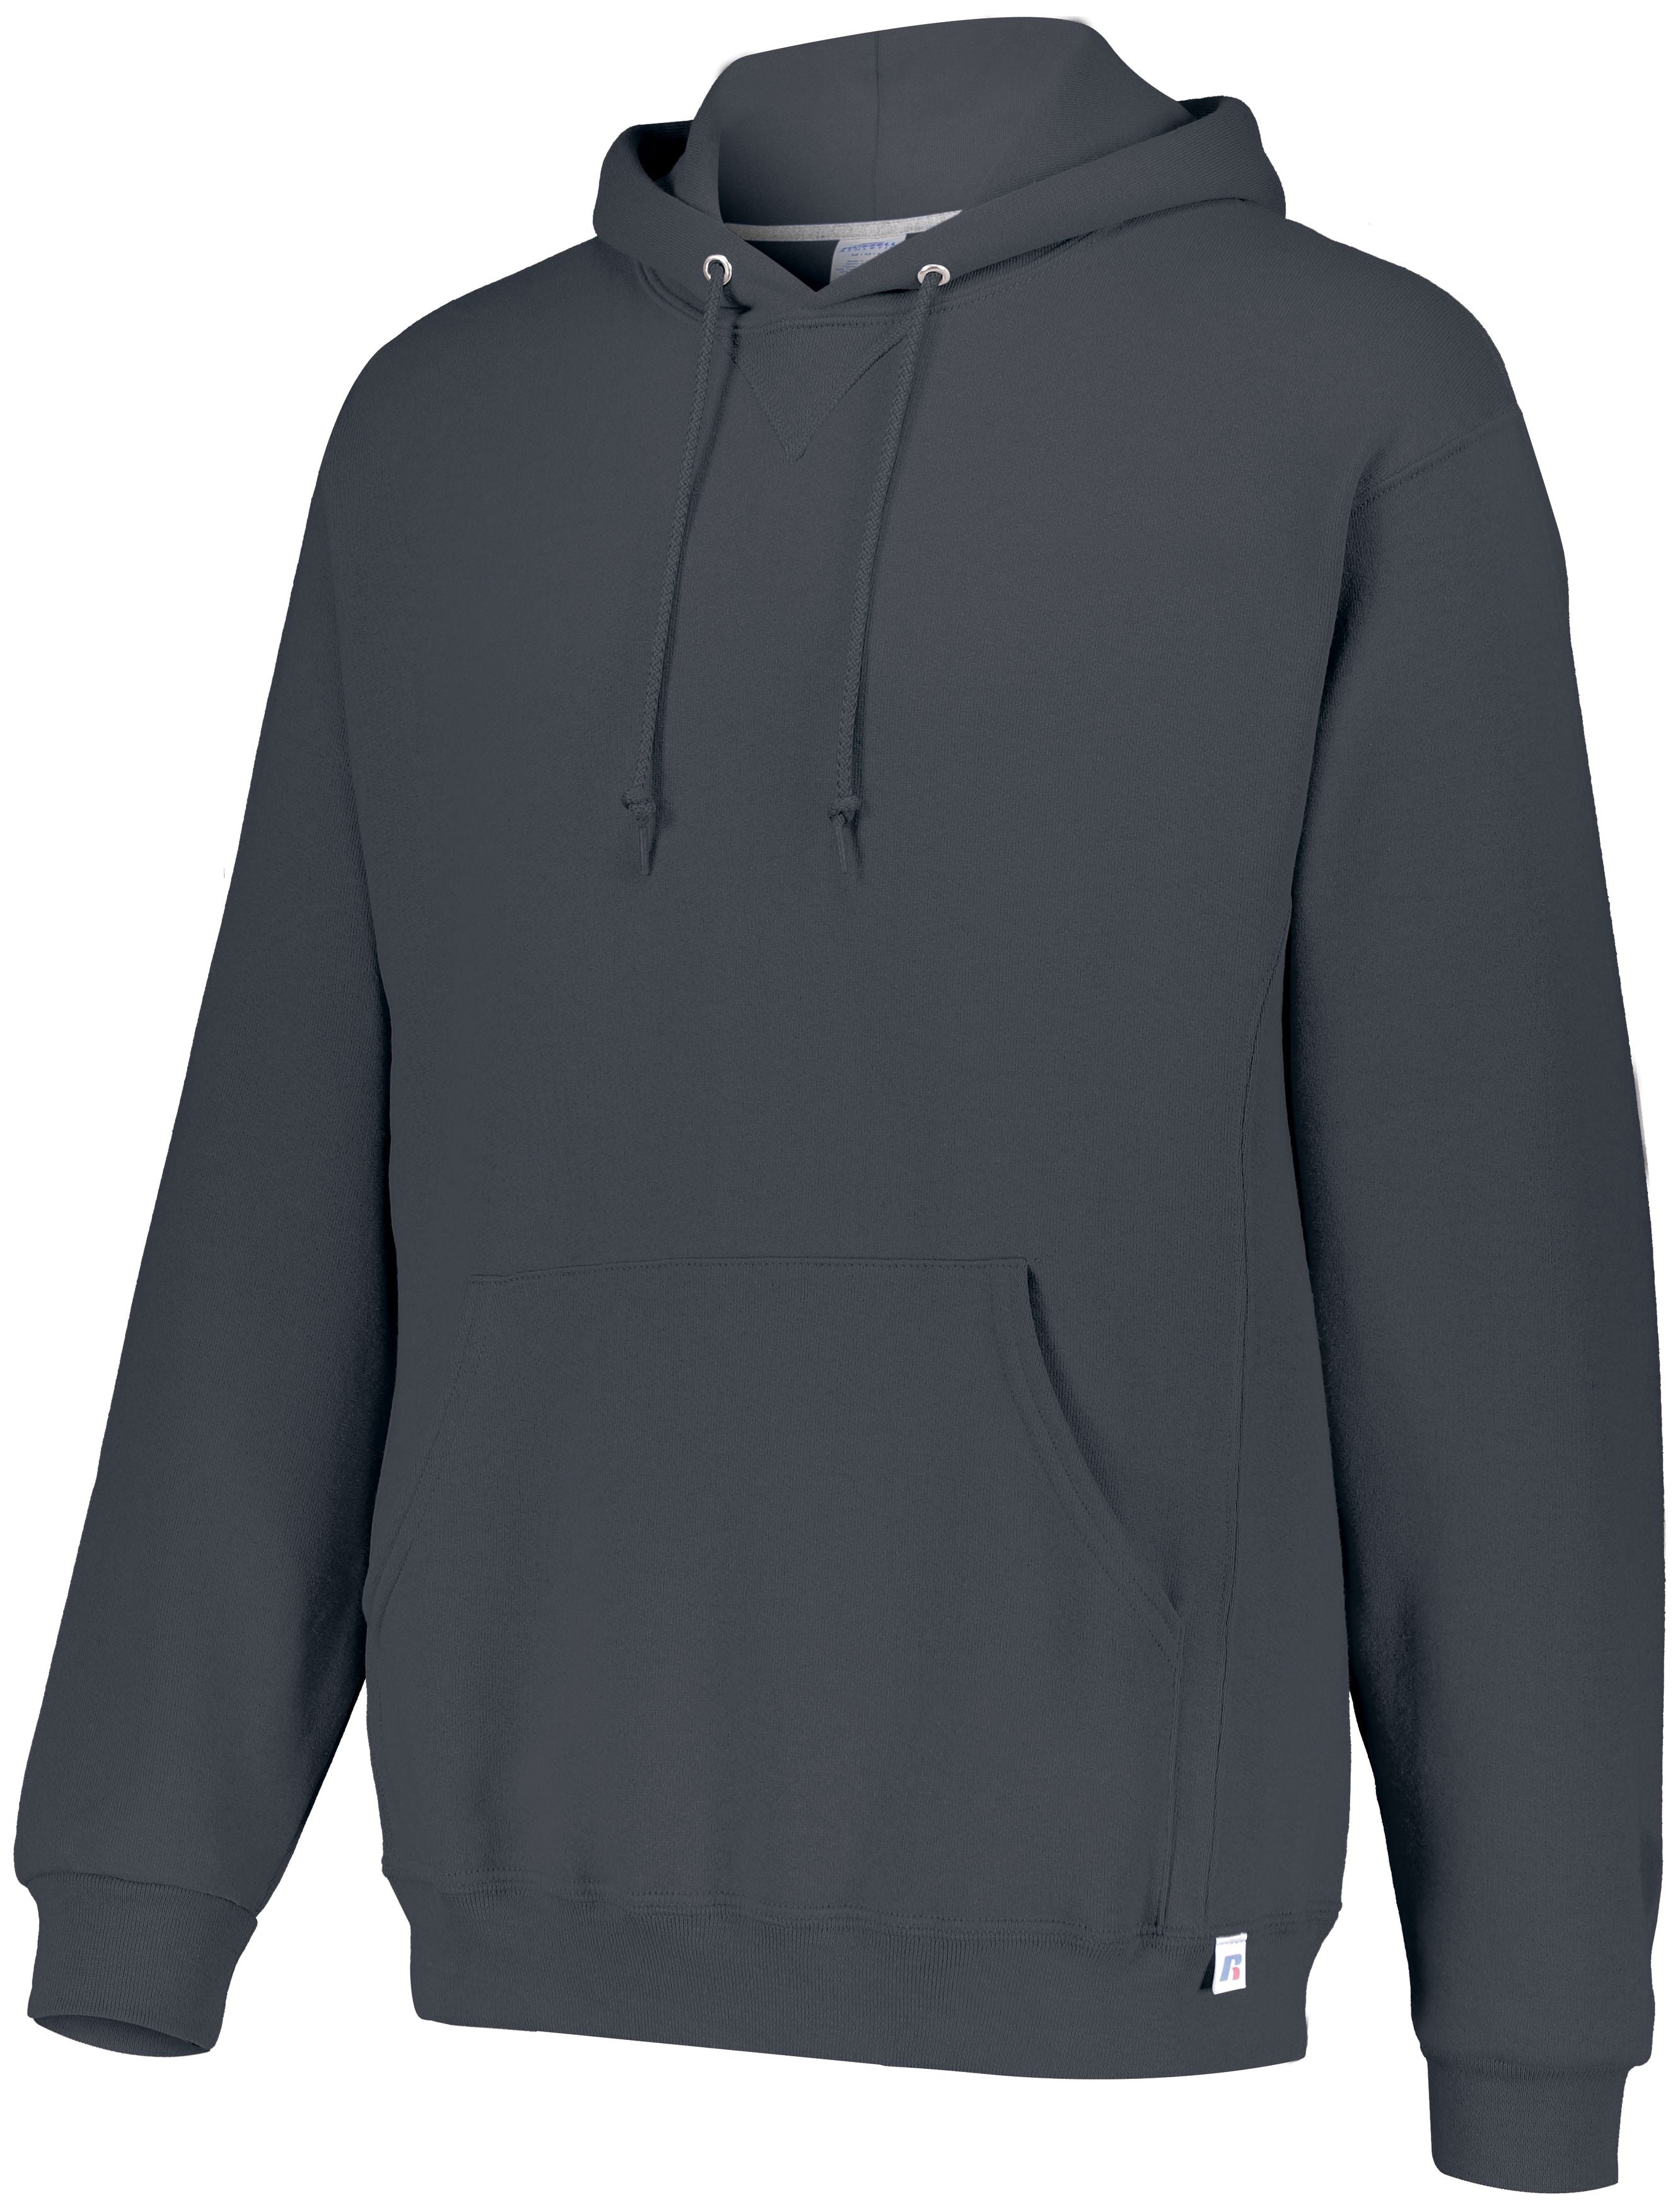 Russell Athletic Dri-Power Fleece Hoodie in Black Heather  -Part of the Adult, Russell-Athletic-Products, Shirts product lines at KanaleyCreations.com